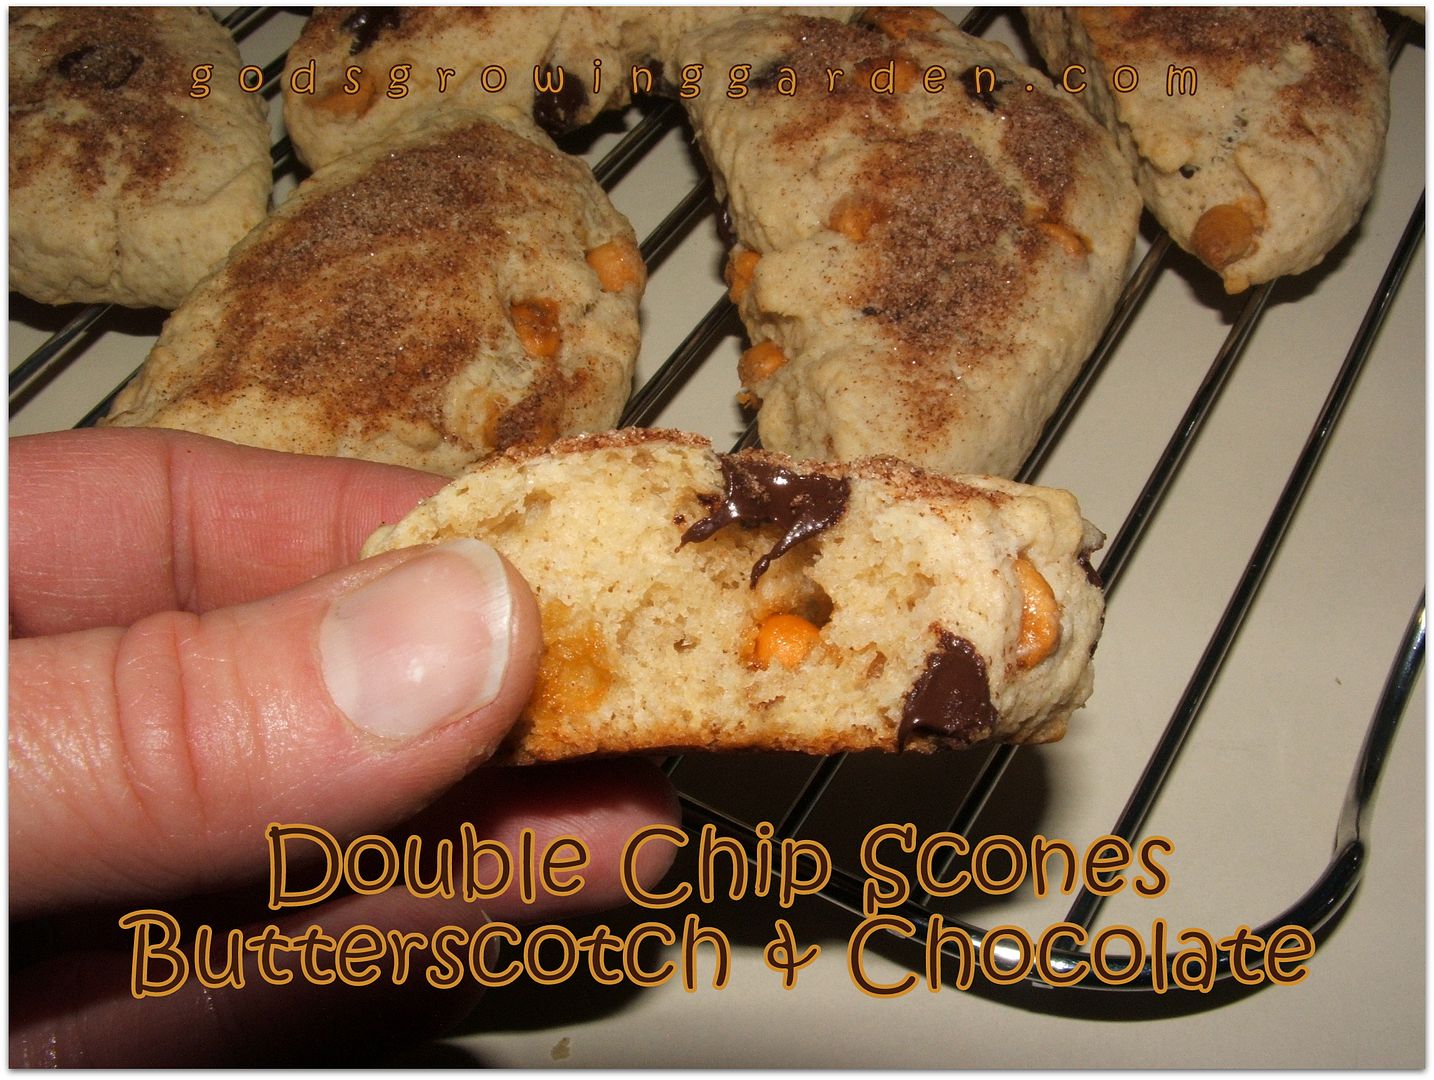 Chocolate & Butterscotch Chip Scones by Angie Ouellette-Tower for godsgrowinggarden.com photo 012_zps7c6d3677.jpg